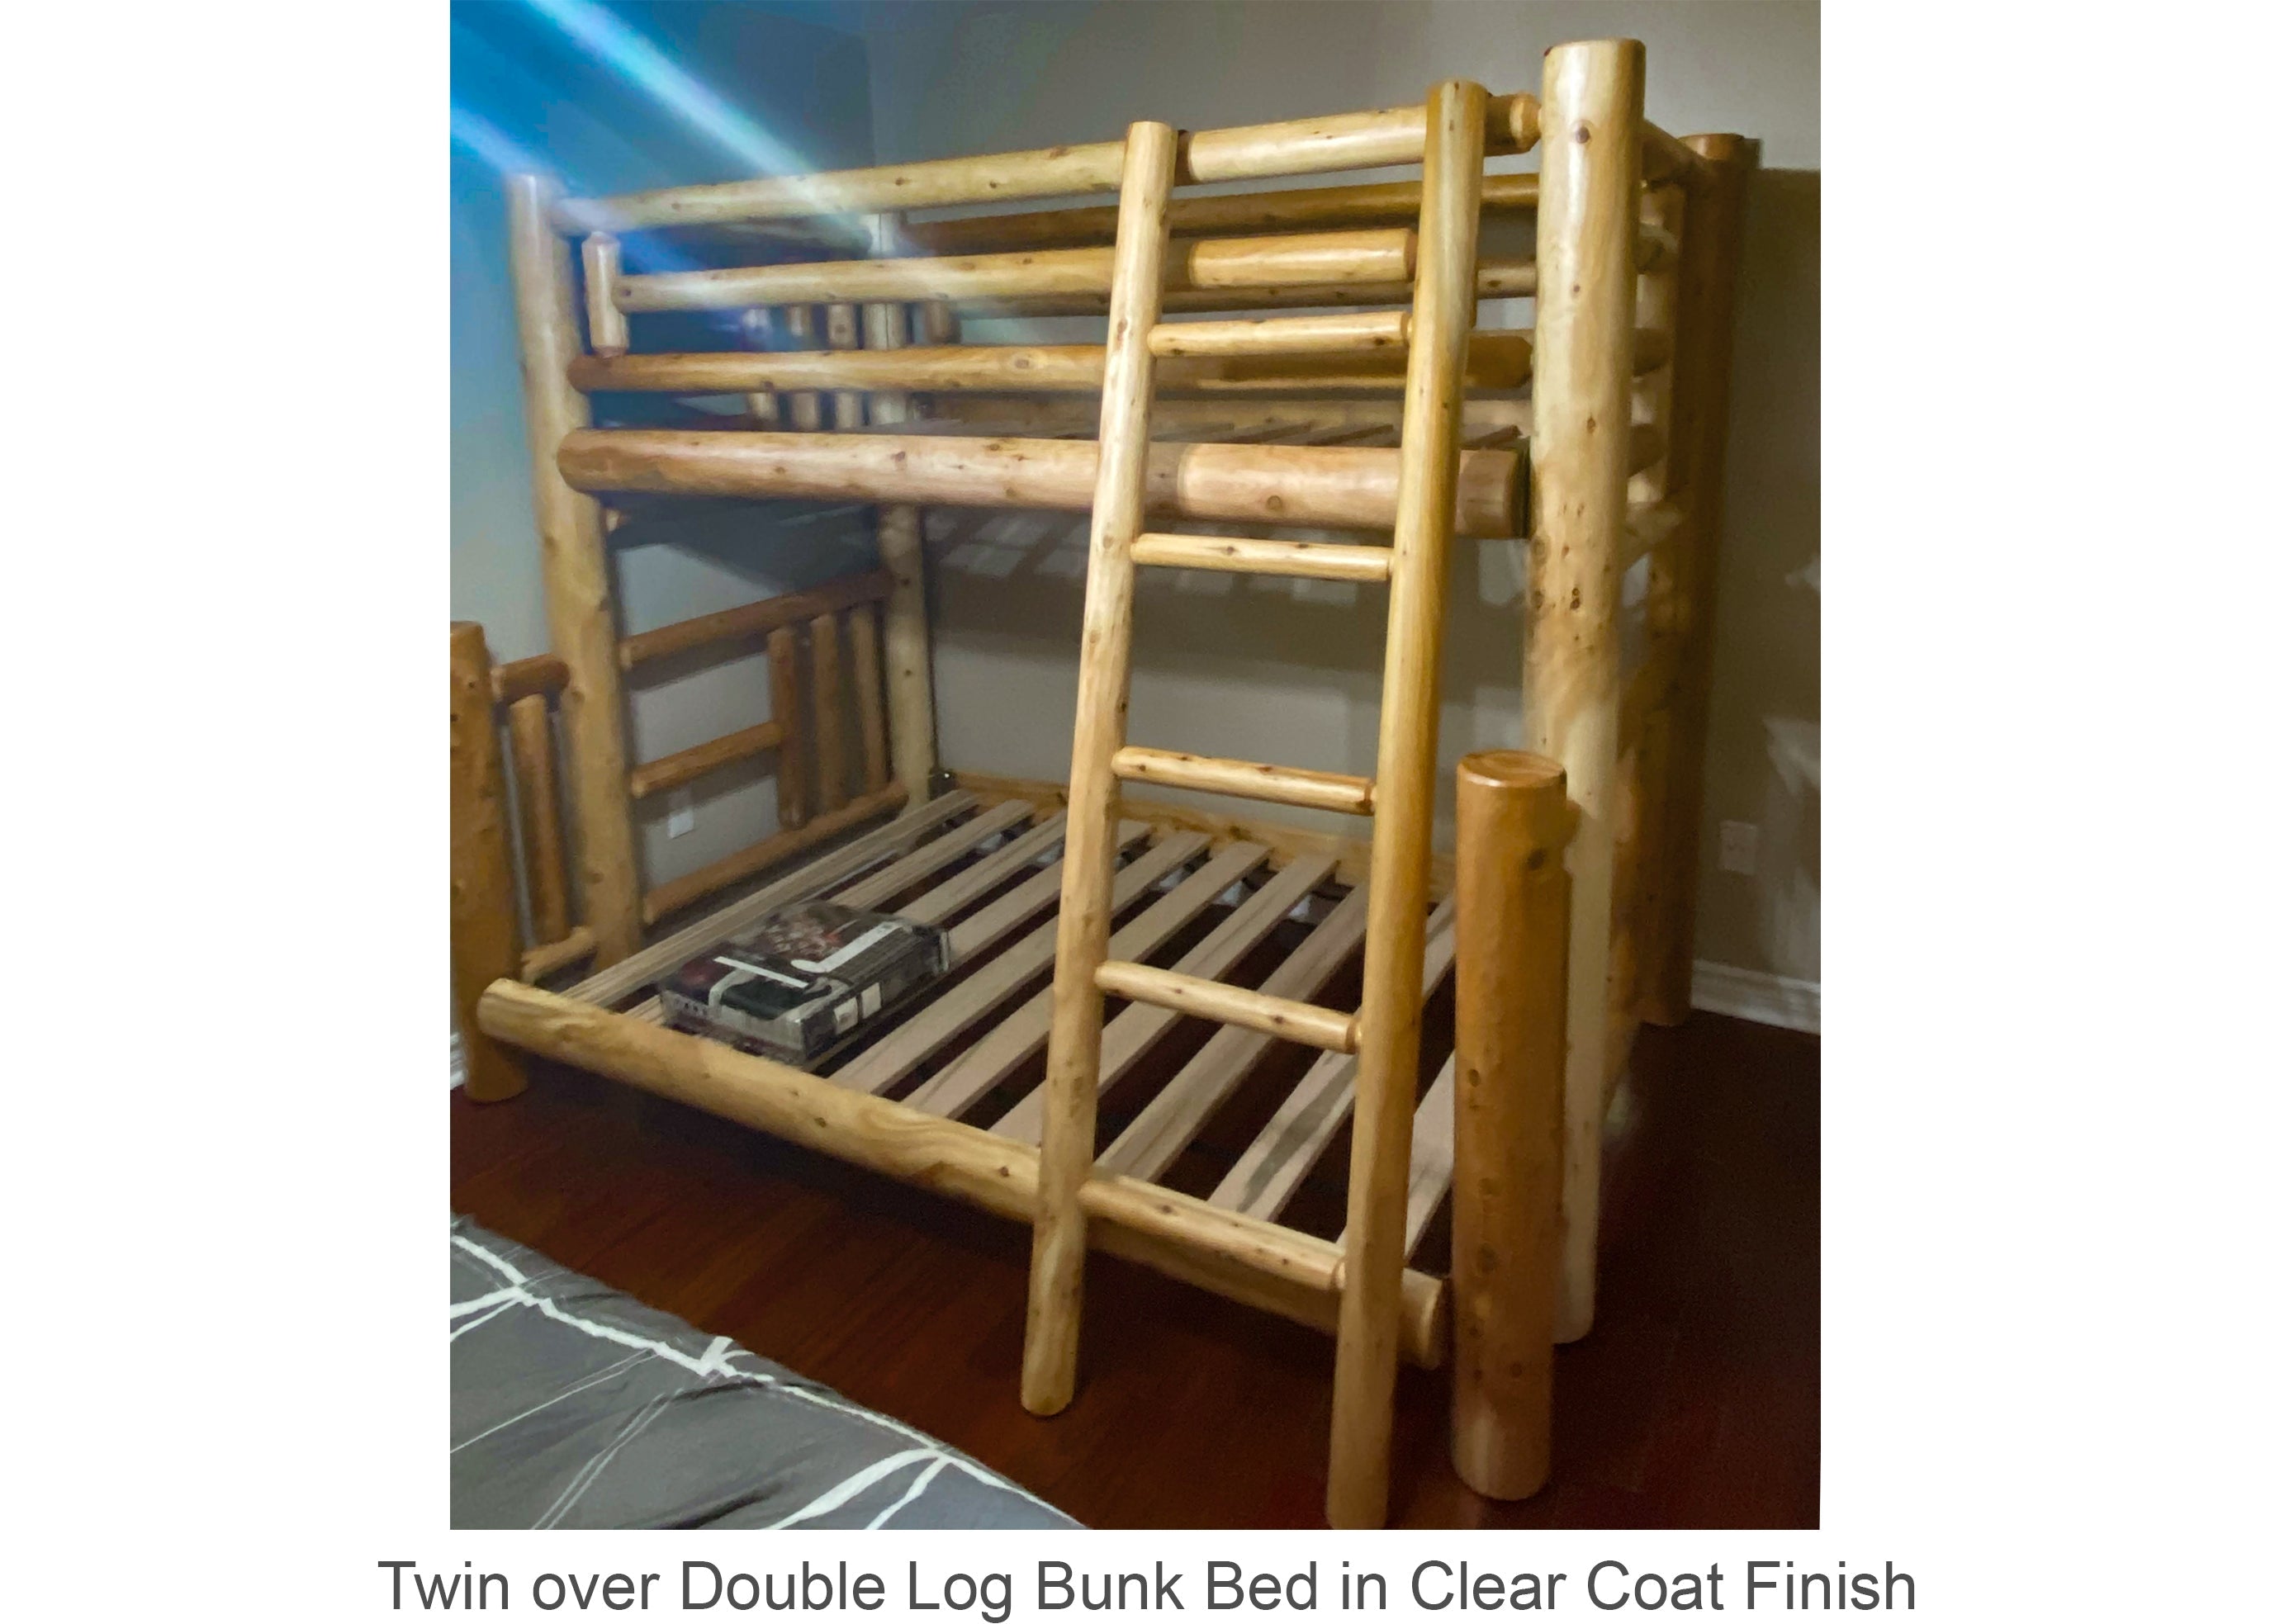 Twin over Double Log Bunk Bed in Clear Coat Finish